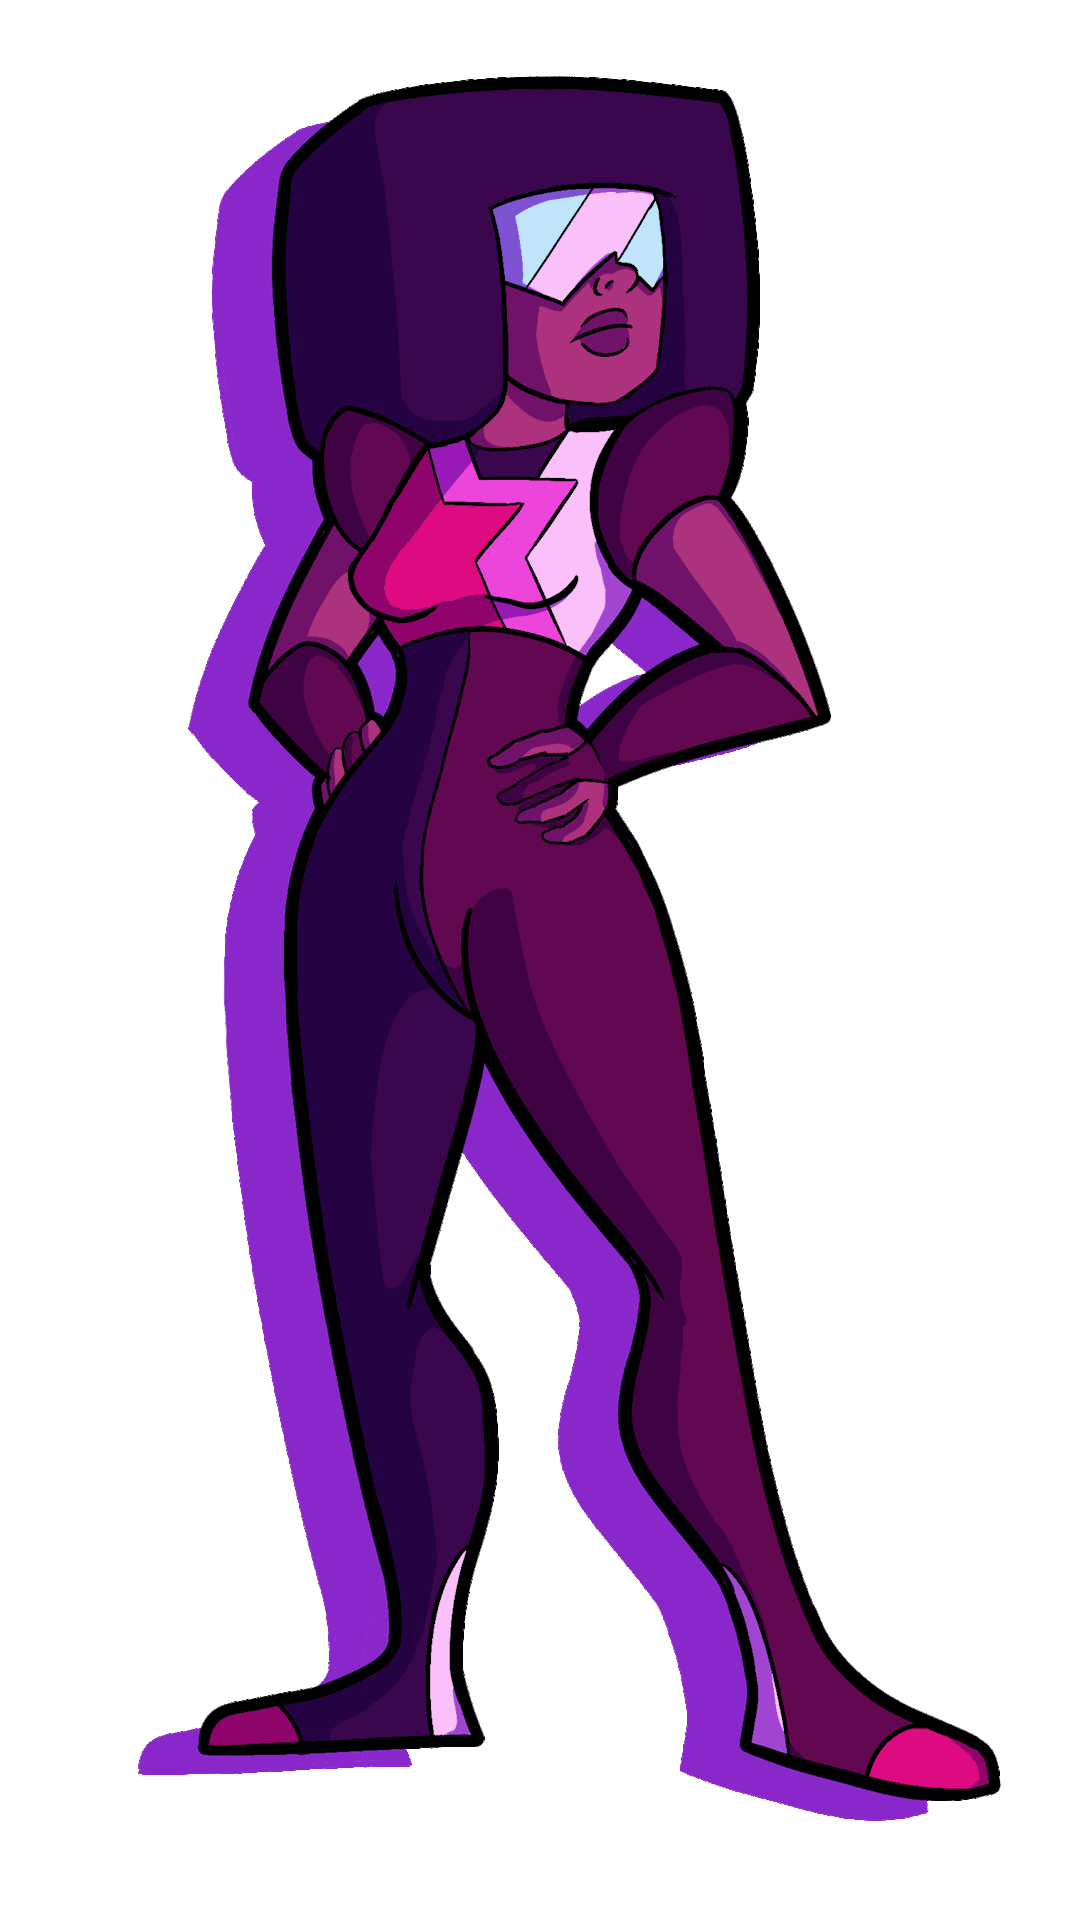 I was busy with work this week so I wanted to work on something smaller than a digital painting but bigger than a doodle. So I made a little animated Garnet.